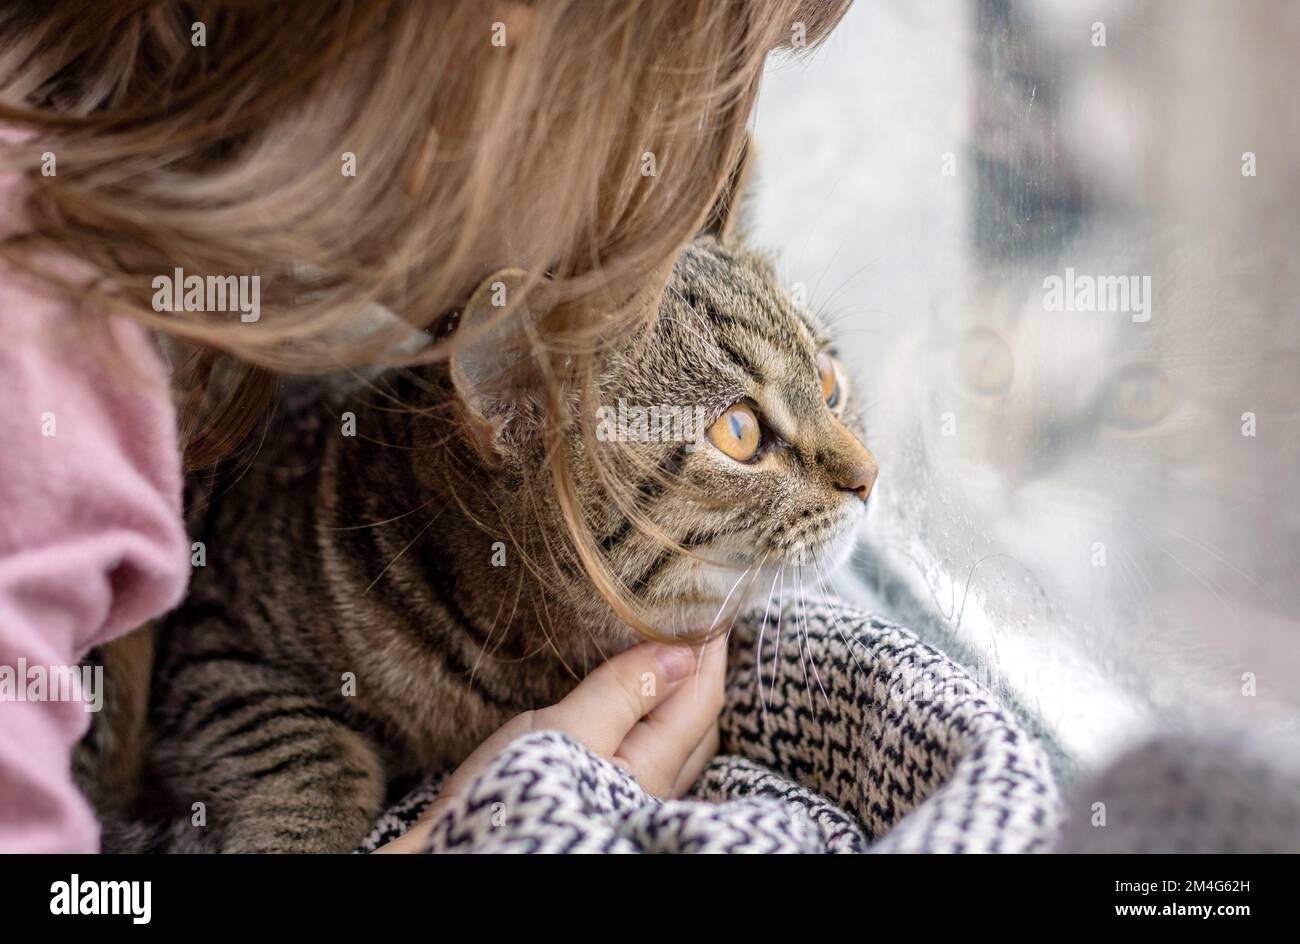 little girl hugging tabby cat kitty on window sill.pussycat reflection in window glass like mirror.adorable domestic pet relation between animal Stock Photo